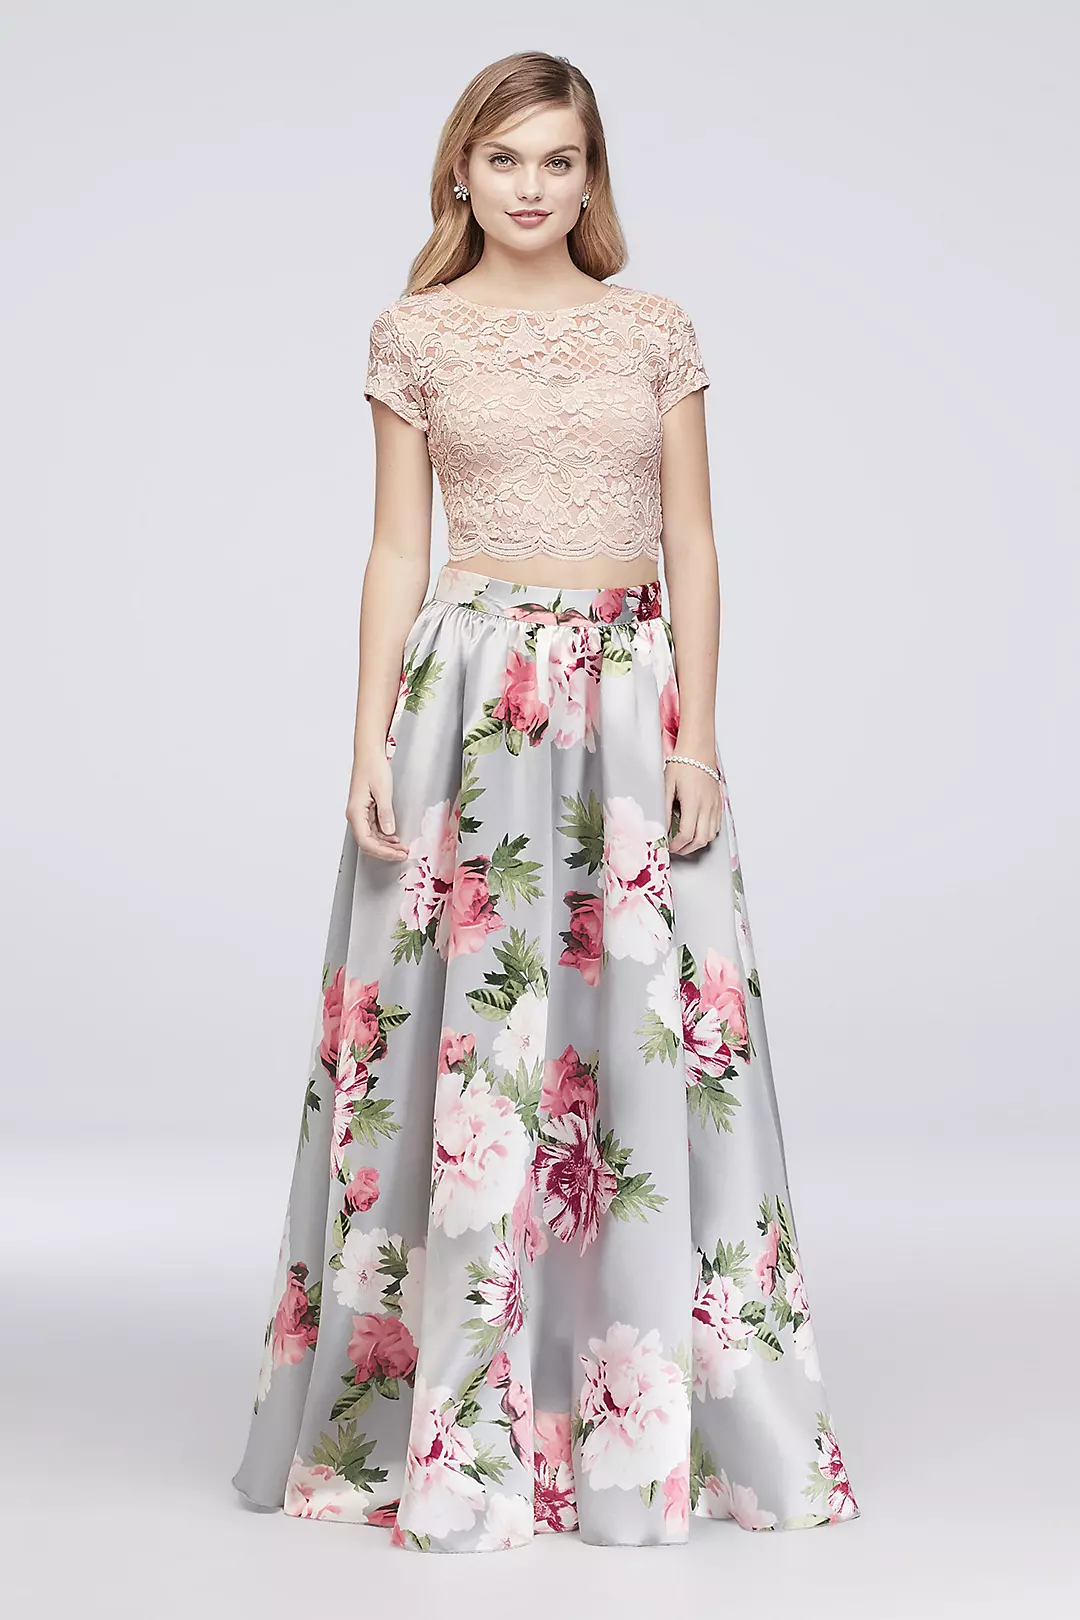 Floral-Printed Mikado and Lace Two-Piece Dress | David's Bridal